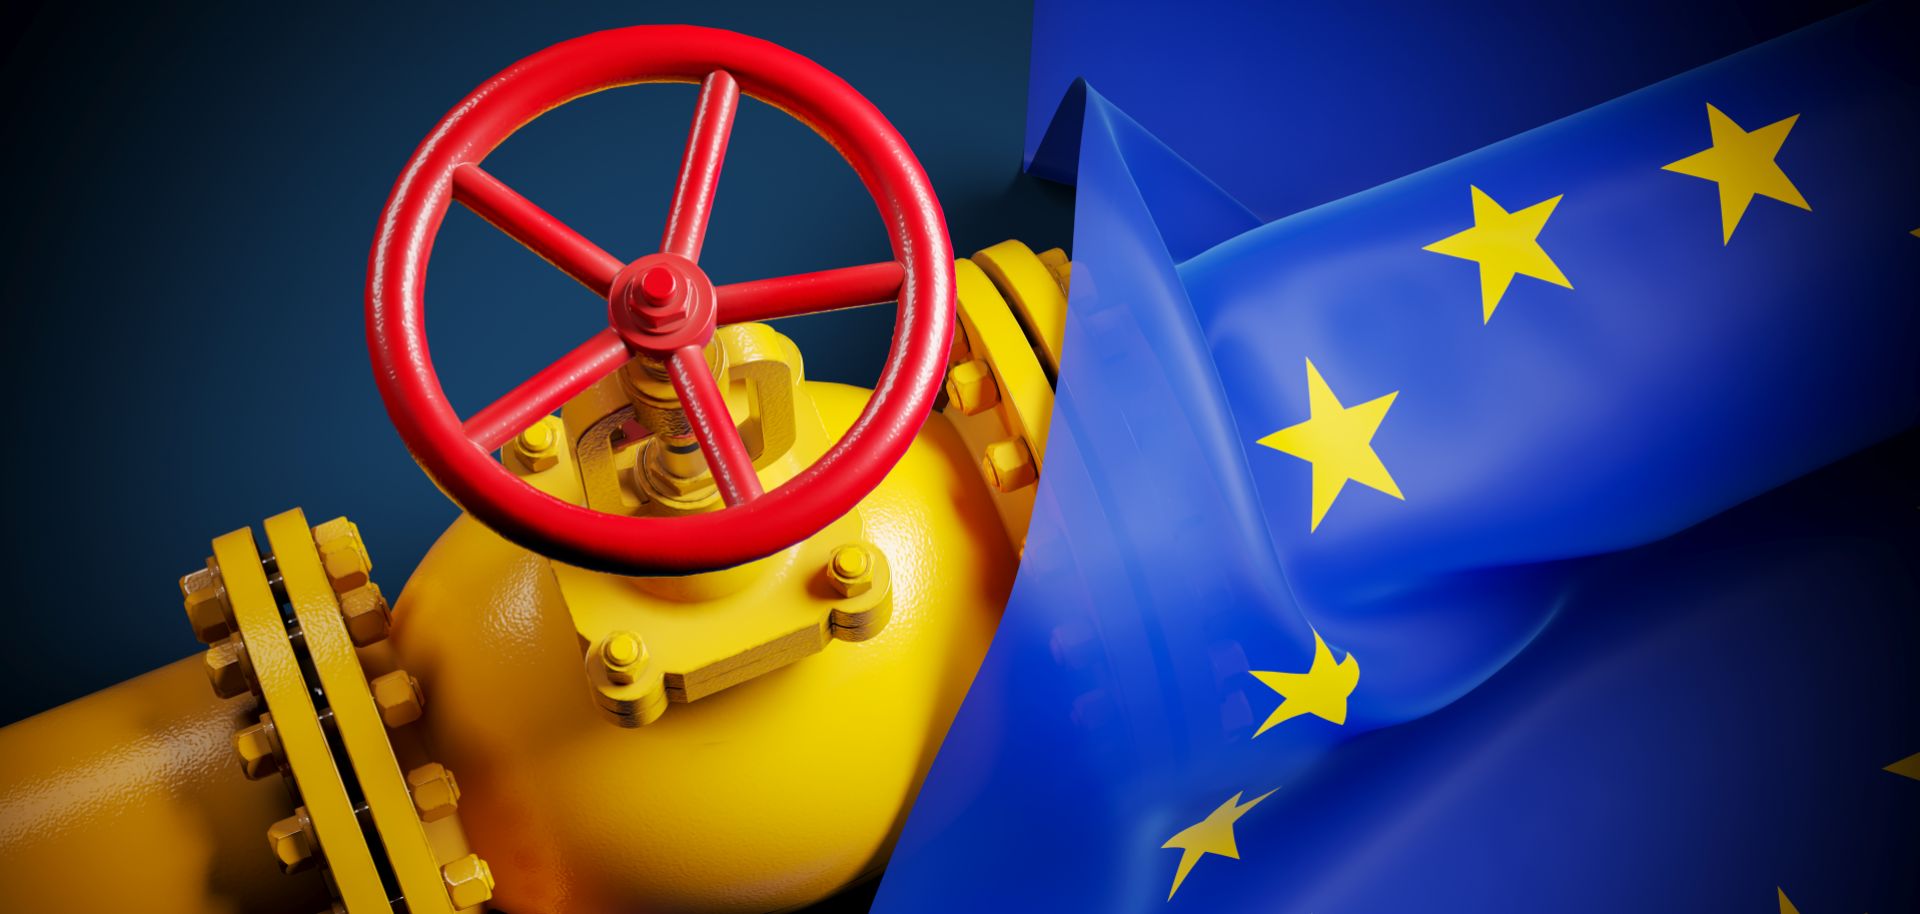 A 3D rendering of the European Union's flag and a gas valve on the Nord Stream natural gas pipeline.